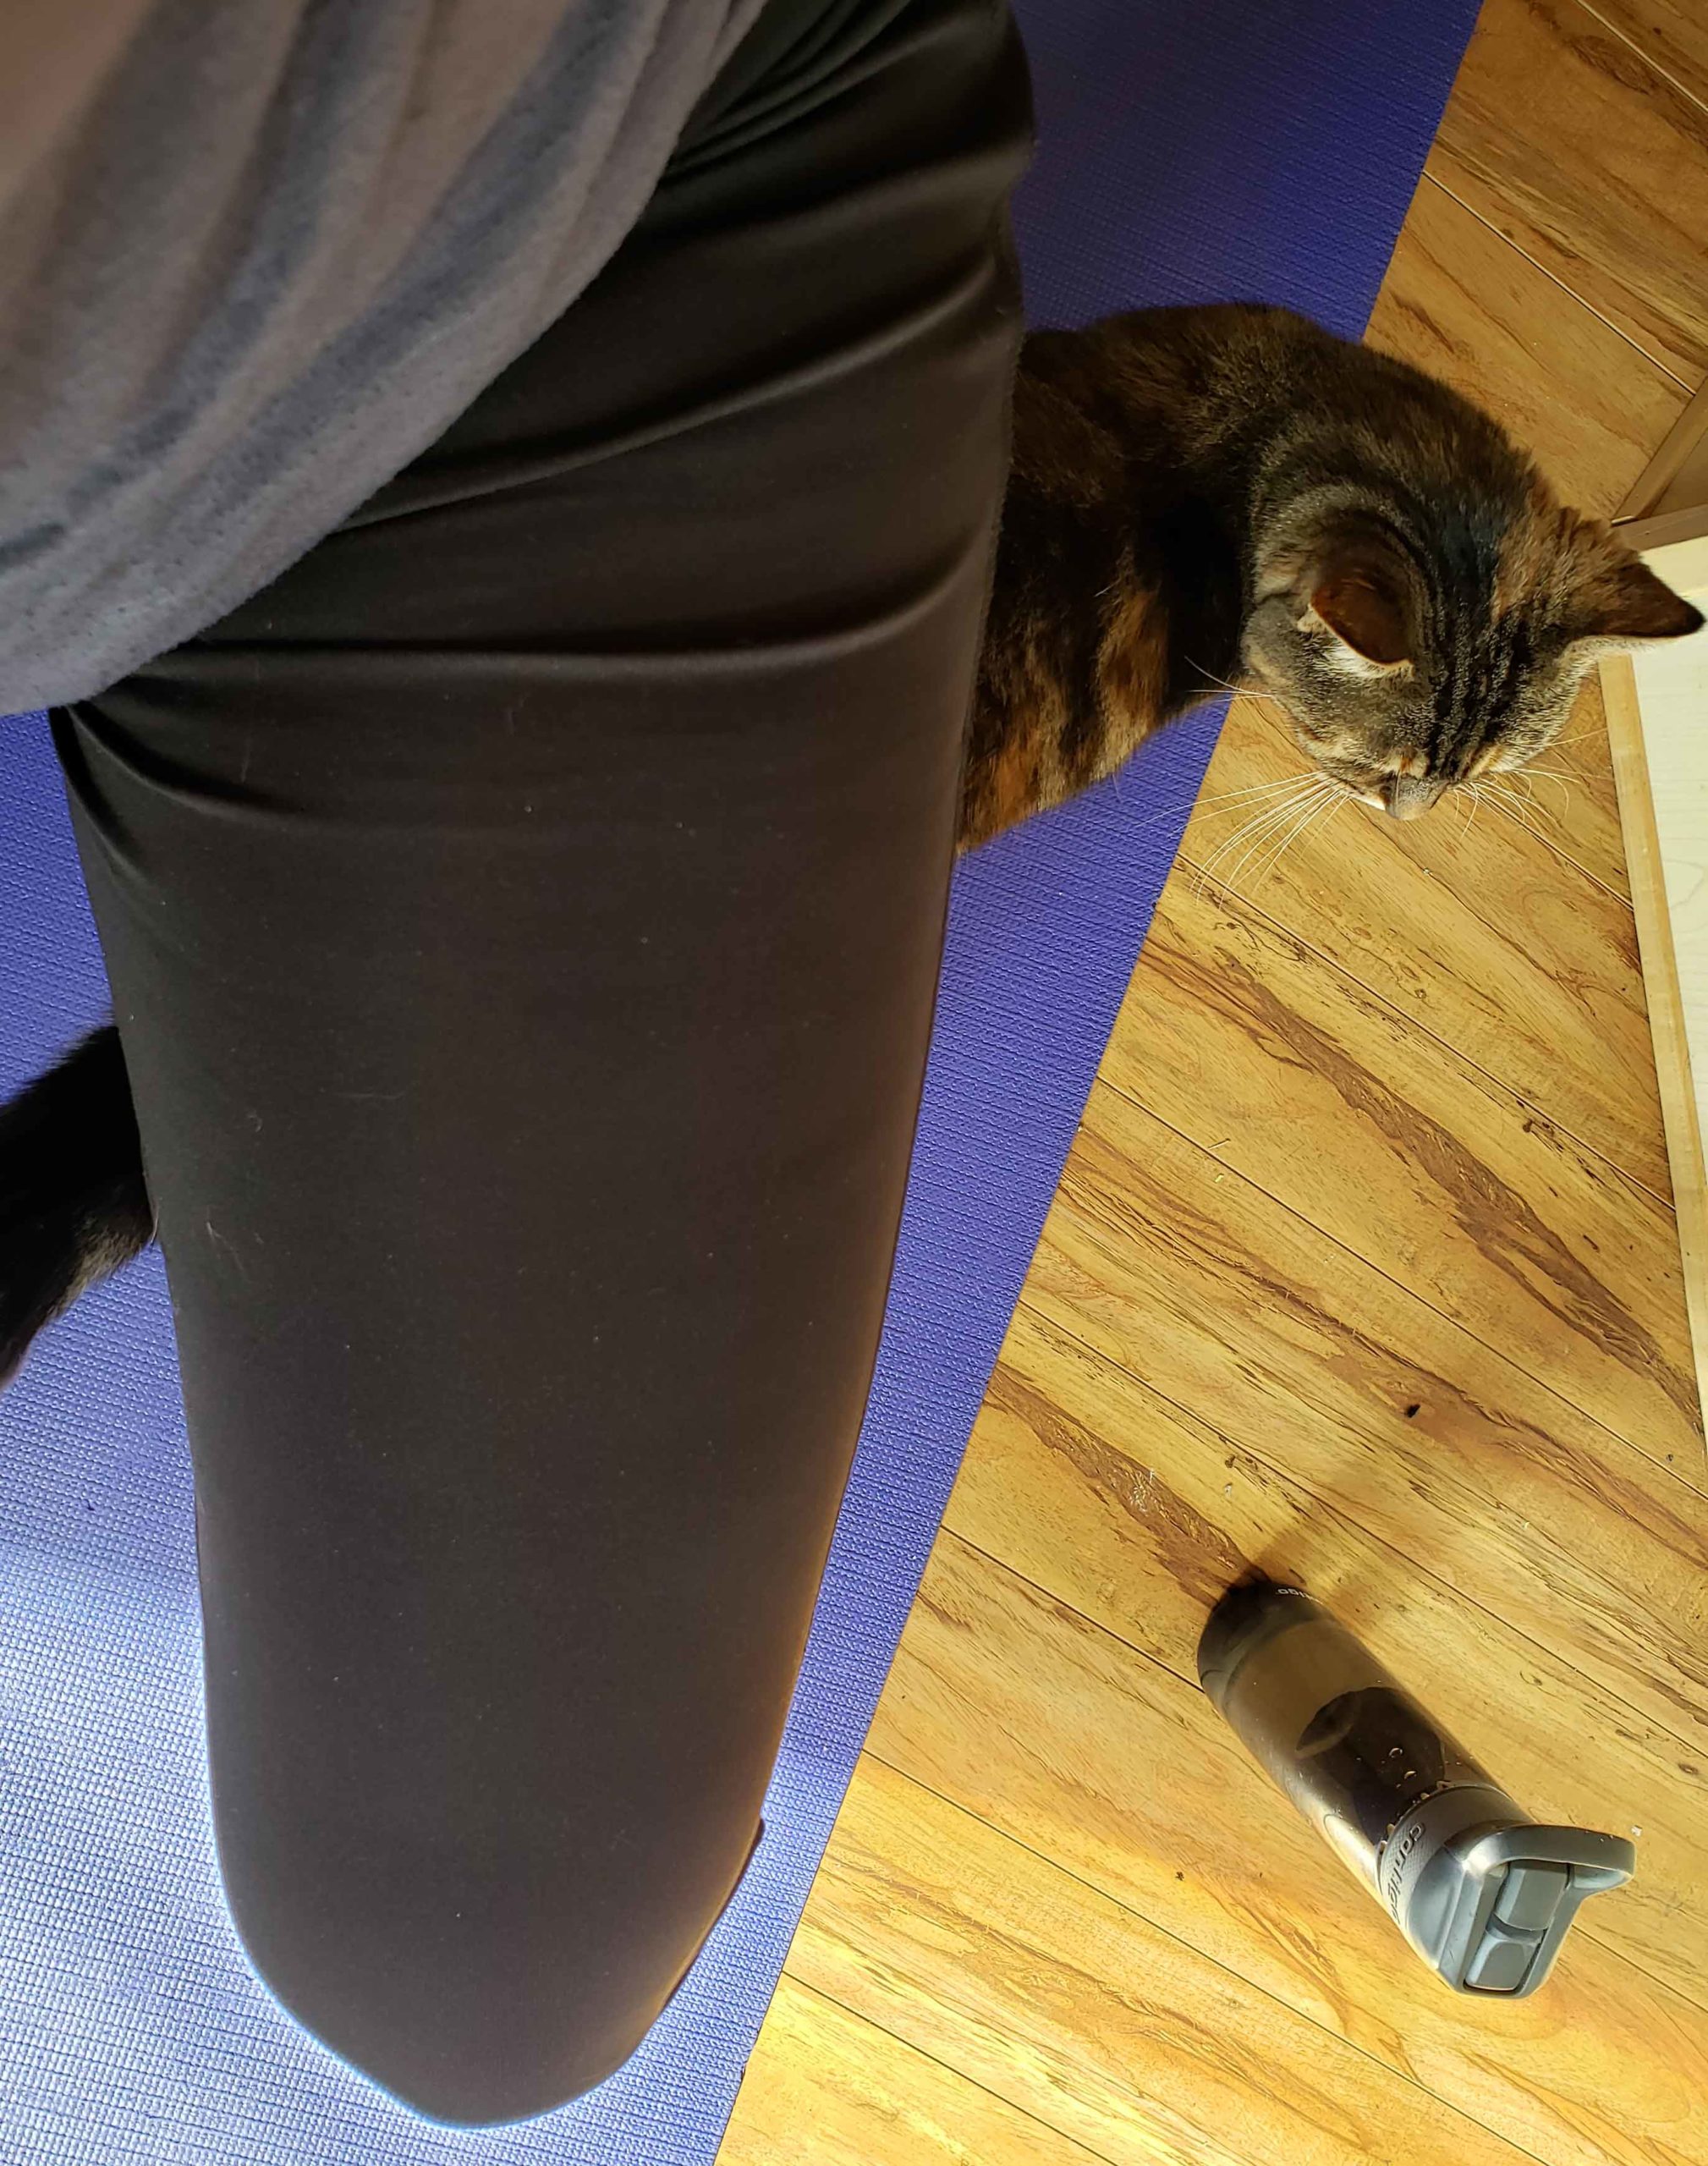 Perspective shot of leg stretching on a purple yoga mat with a water bottle and a cat getting in the way. Taken for the Strides Virtual Challenge.